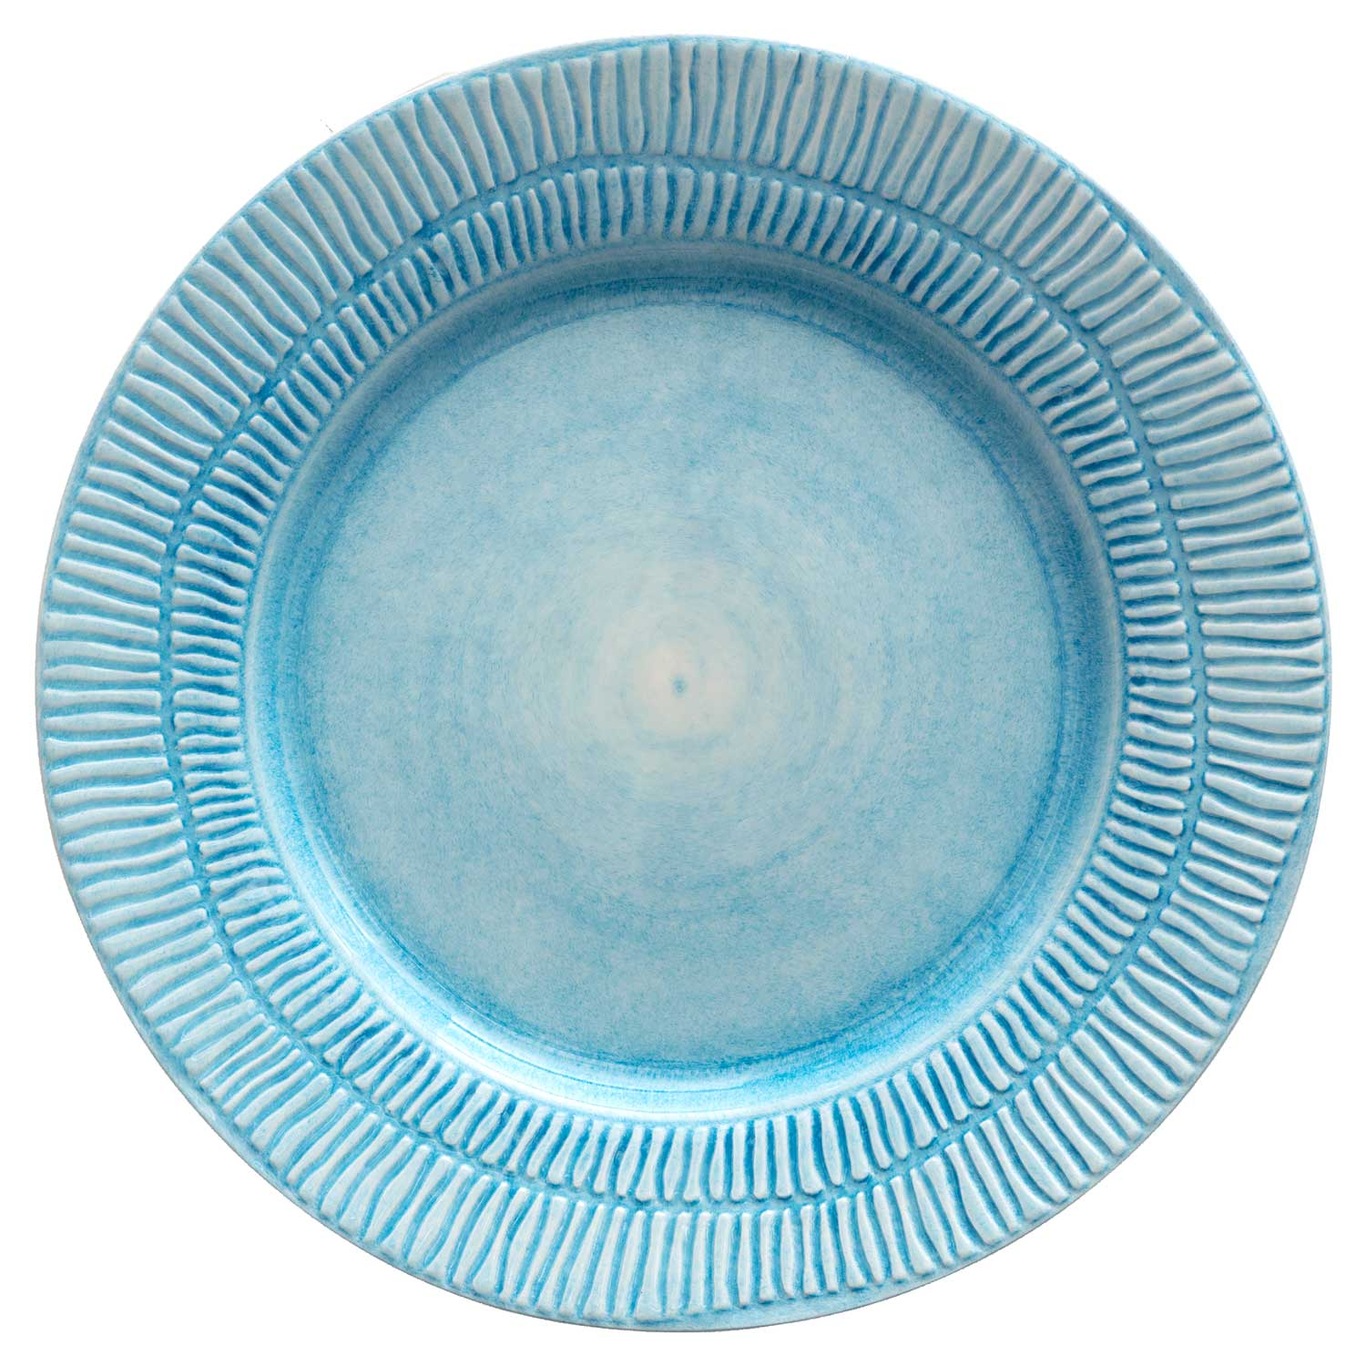 Stripes Plate 28 cm, Turquoise